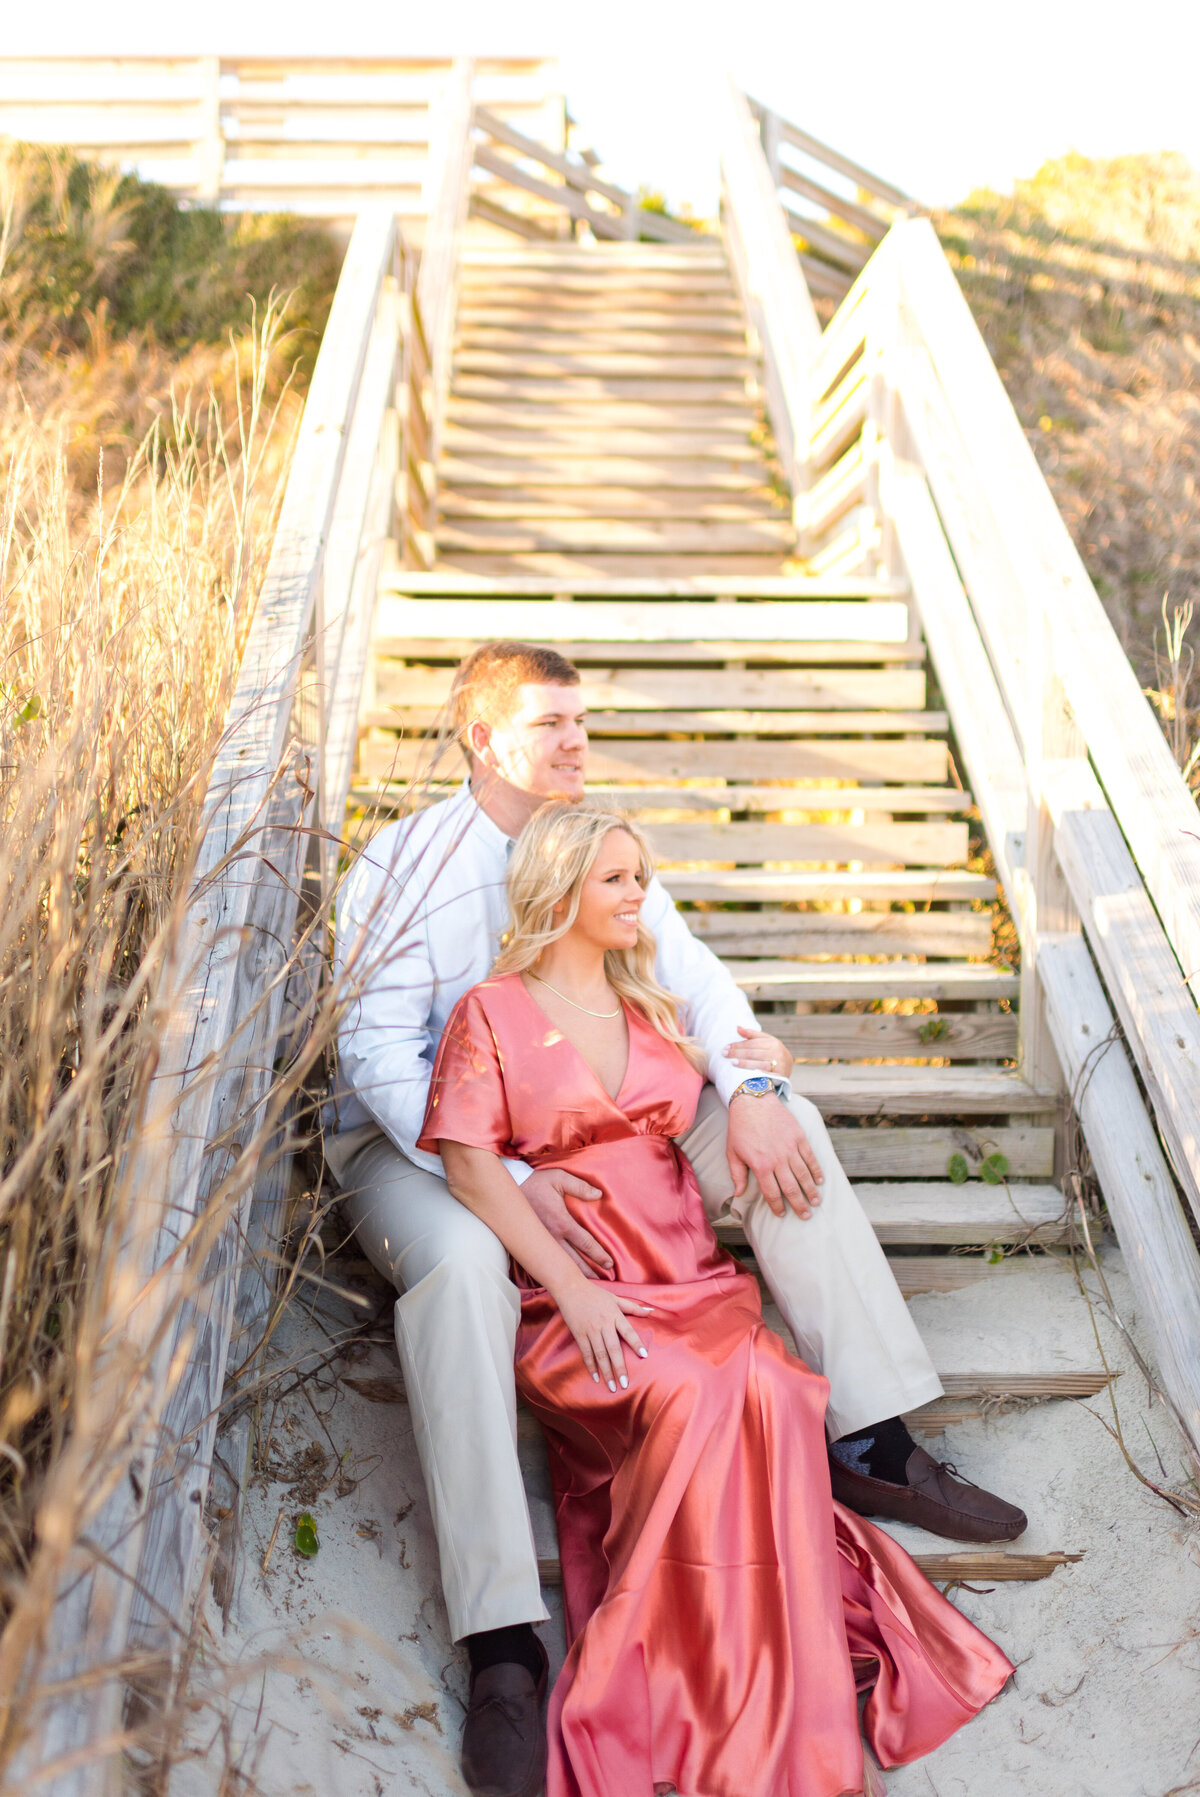 Katie + Tanner Engagement Session - Photography by Gerri Anna-120